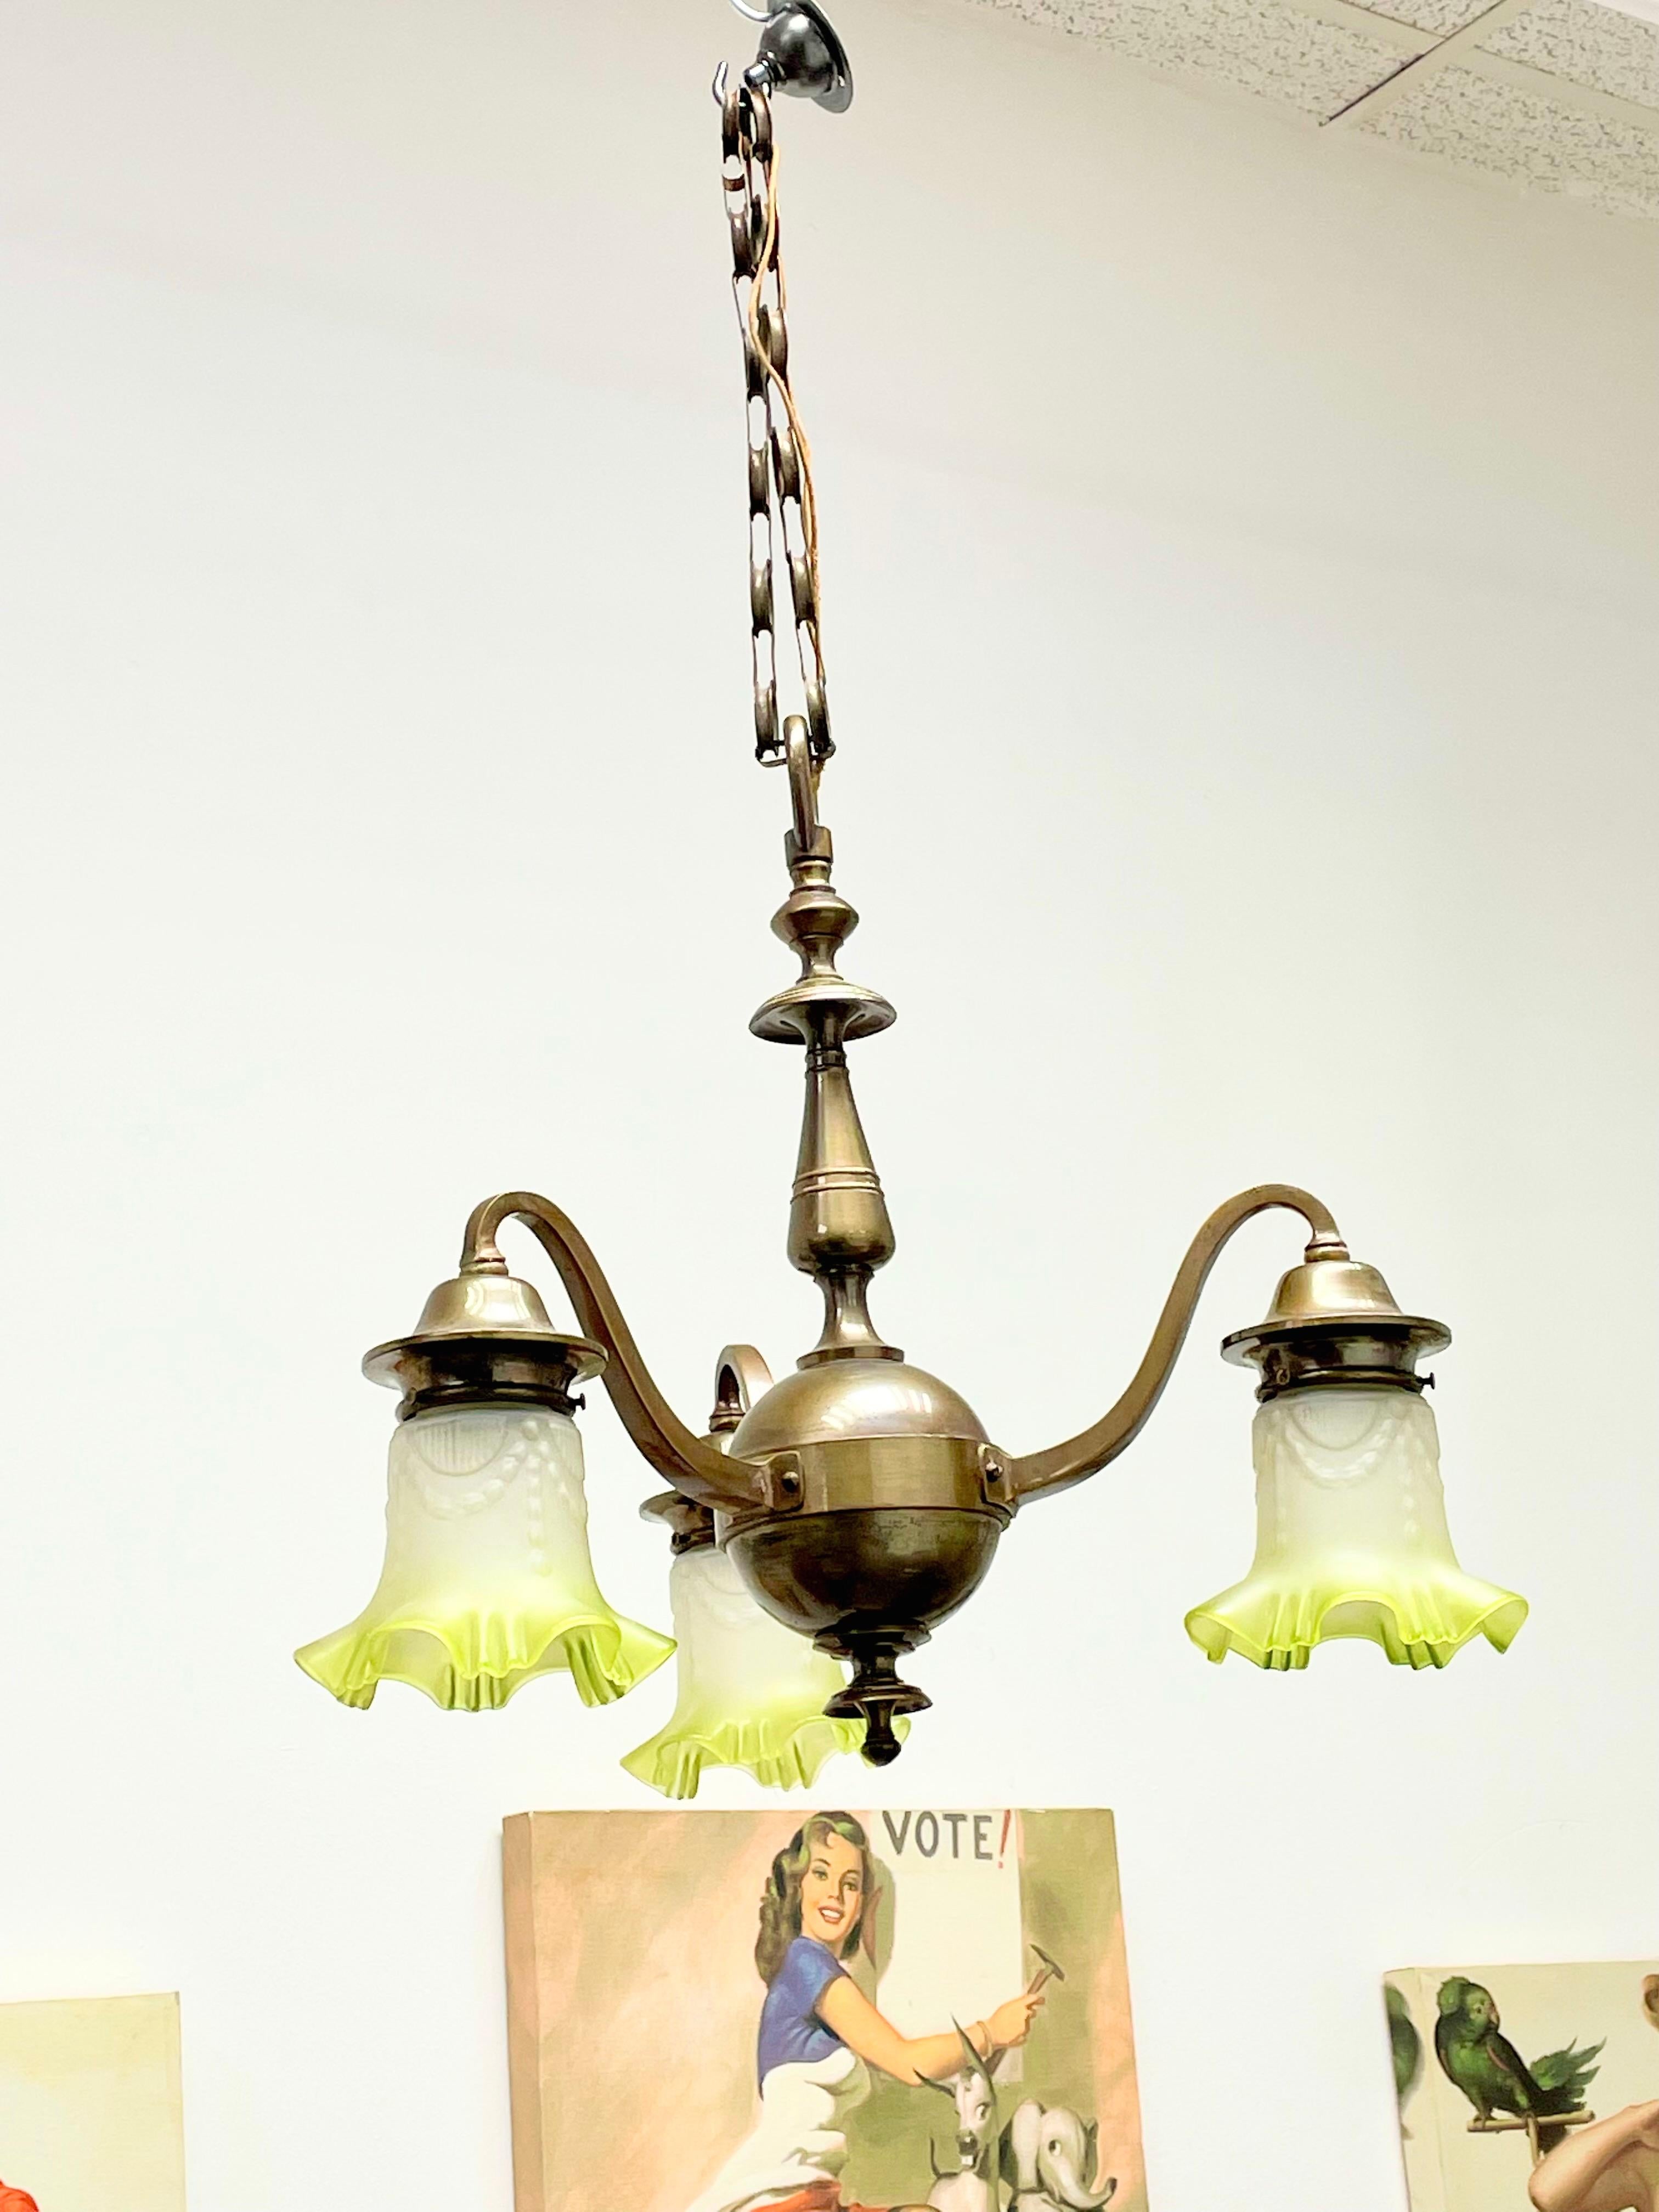 Petite Art Nouveau chandelier. Functions as is with three E27 / 110 Volt light bulbs. Can take up to 60 Watts each bulb. Beautiful bronze metal chandelier. Found at an estate sale in Vienna Austria.
It gives the room a beautiful warm light and